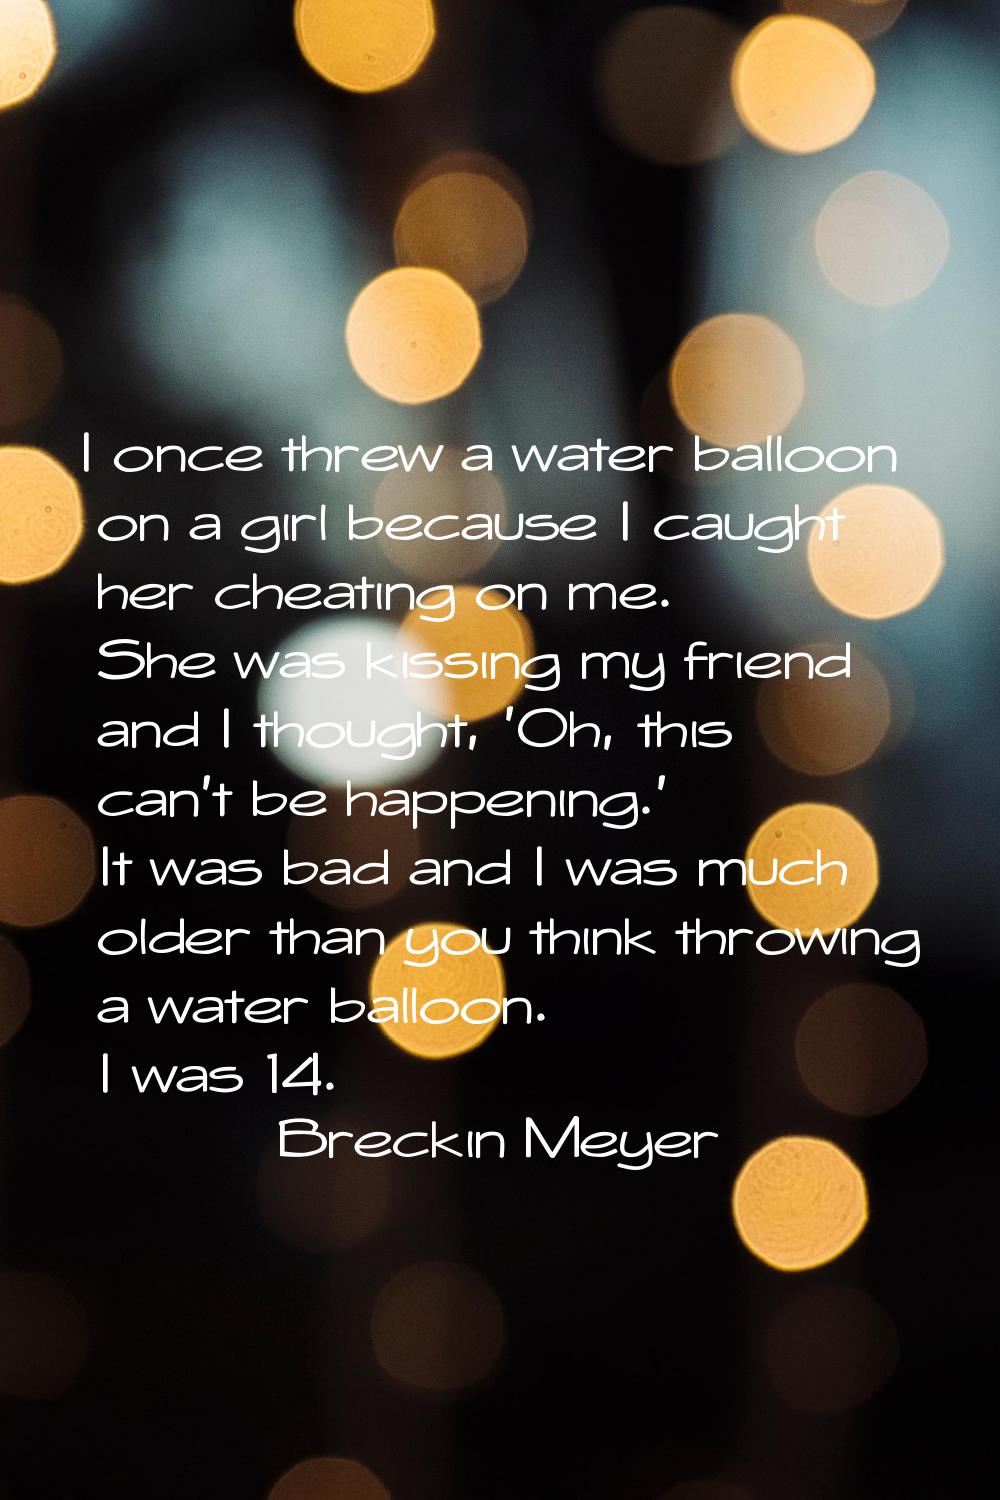 I once threw a water balloon on a girl because I caught her cheating on me. She was kissing my frie